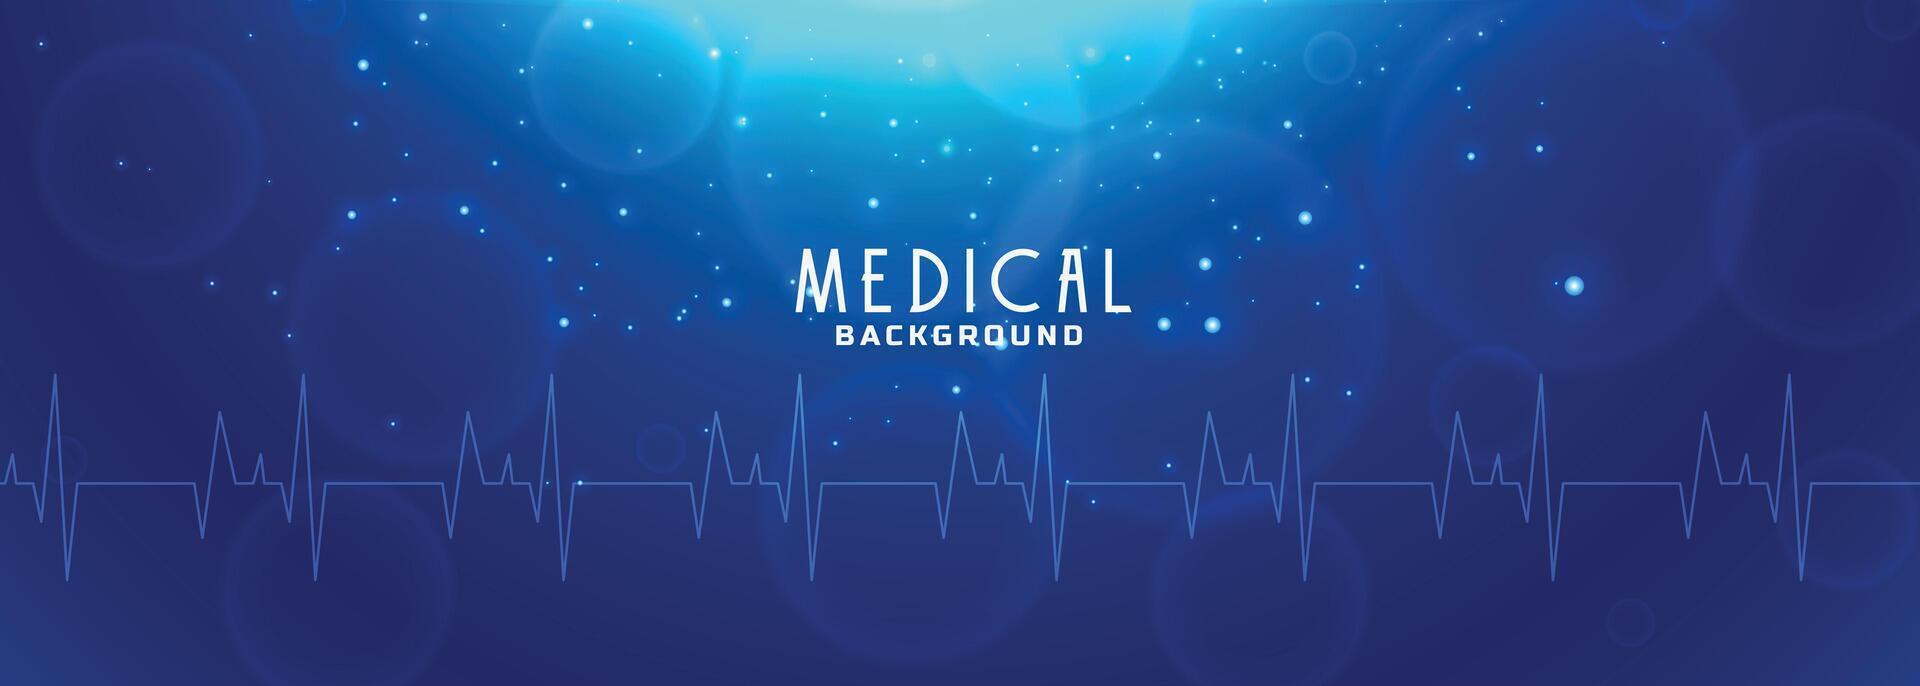 healthcare and medical science blue banner design vector